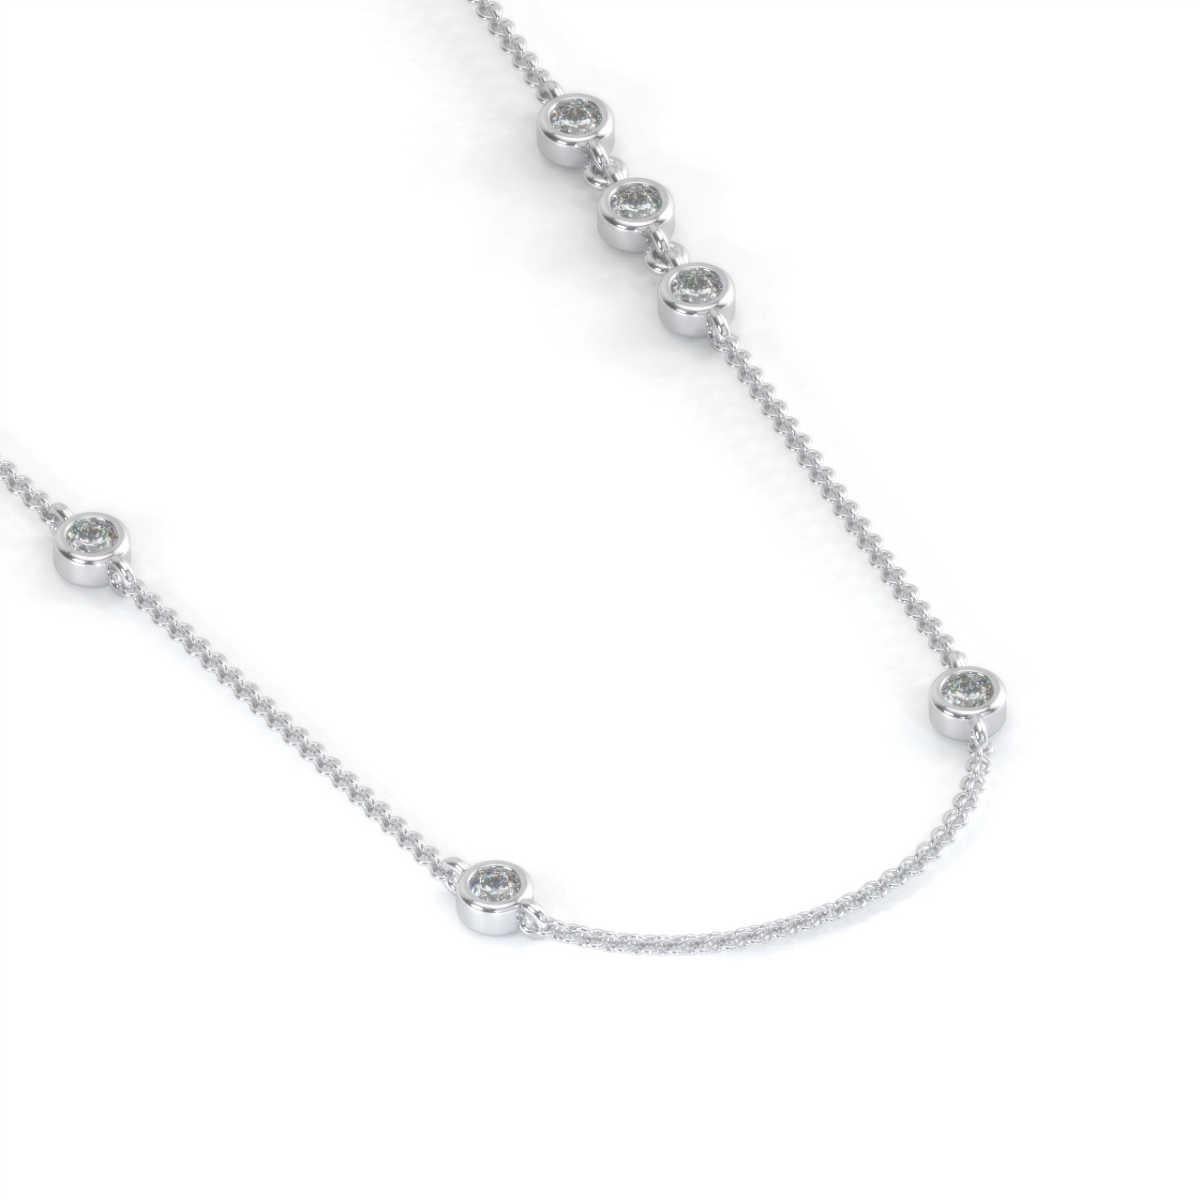 This delicate necklace features six (6) round brilliant diamonds stations bezel set. Experience the difference!

Product details: 

Center Gemstone Type: NATURAL DIAMOND
Center Gemstone Color: WHITE
Center Gemstone Shape: ROUND
Metal: 18K White